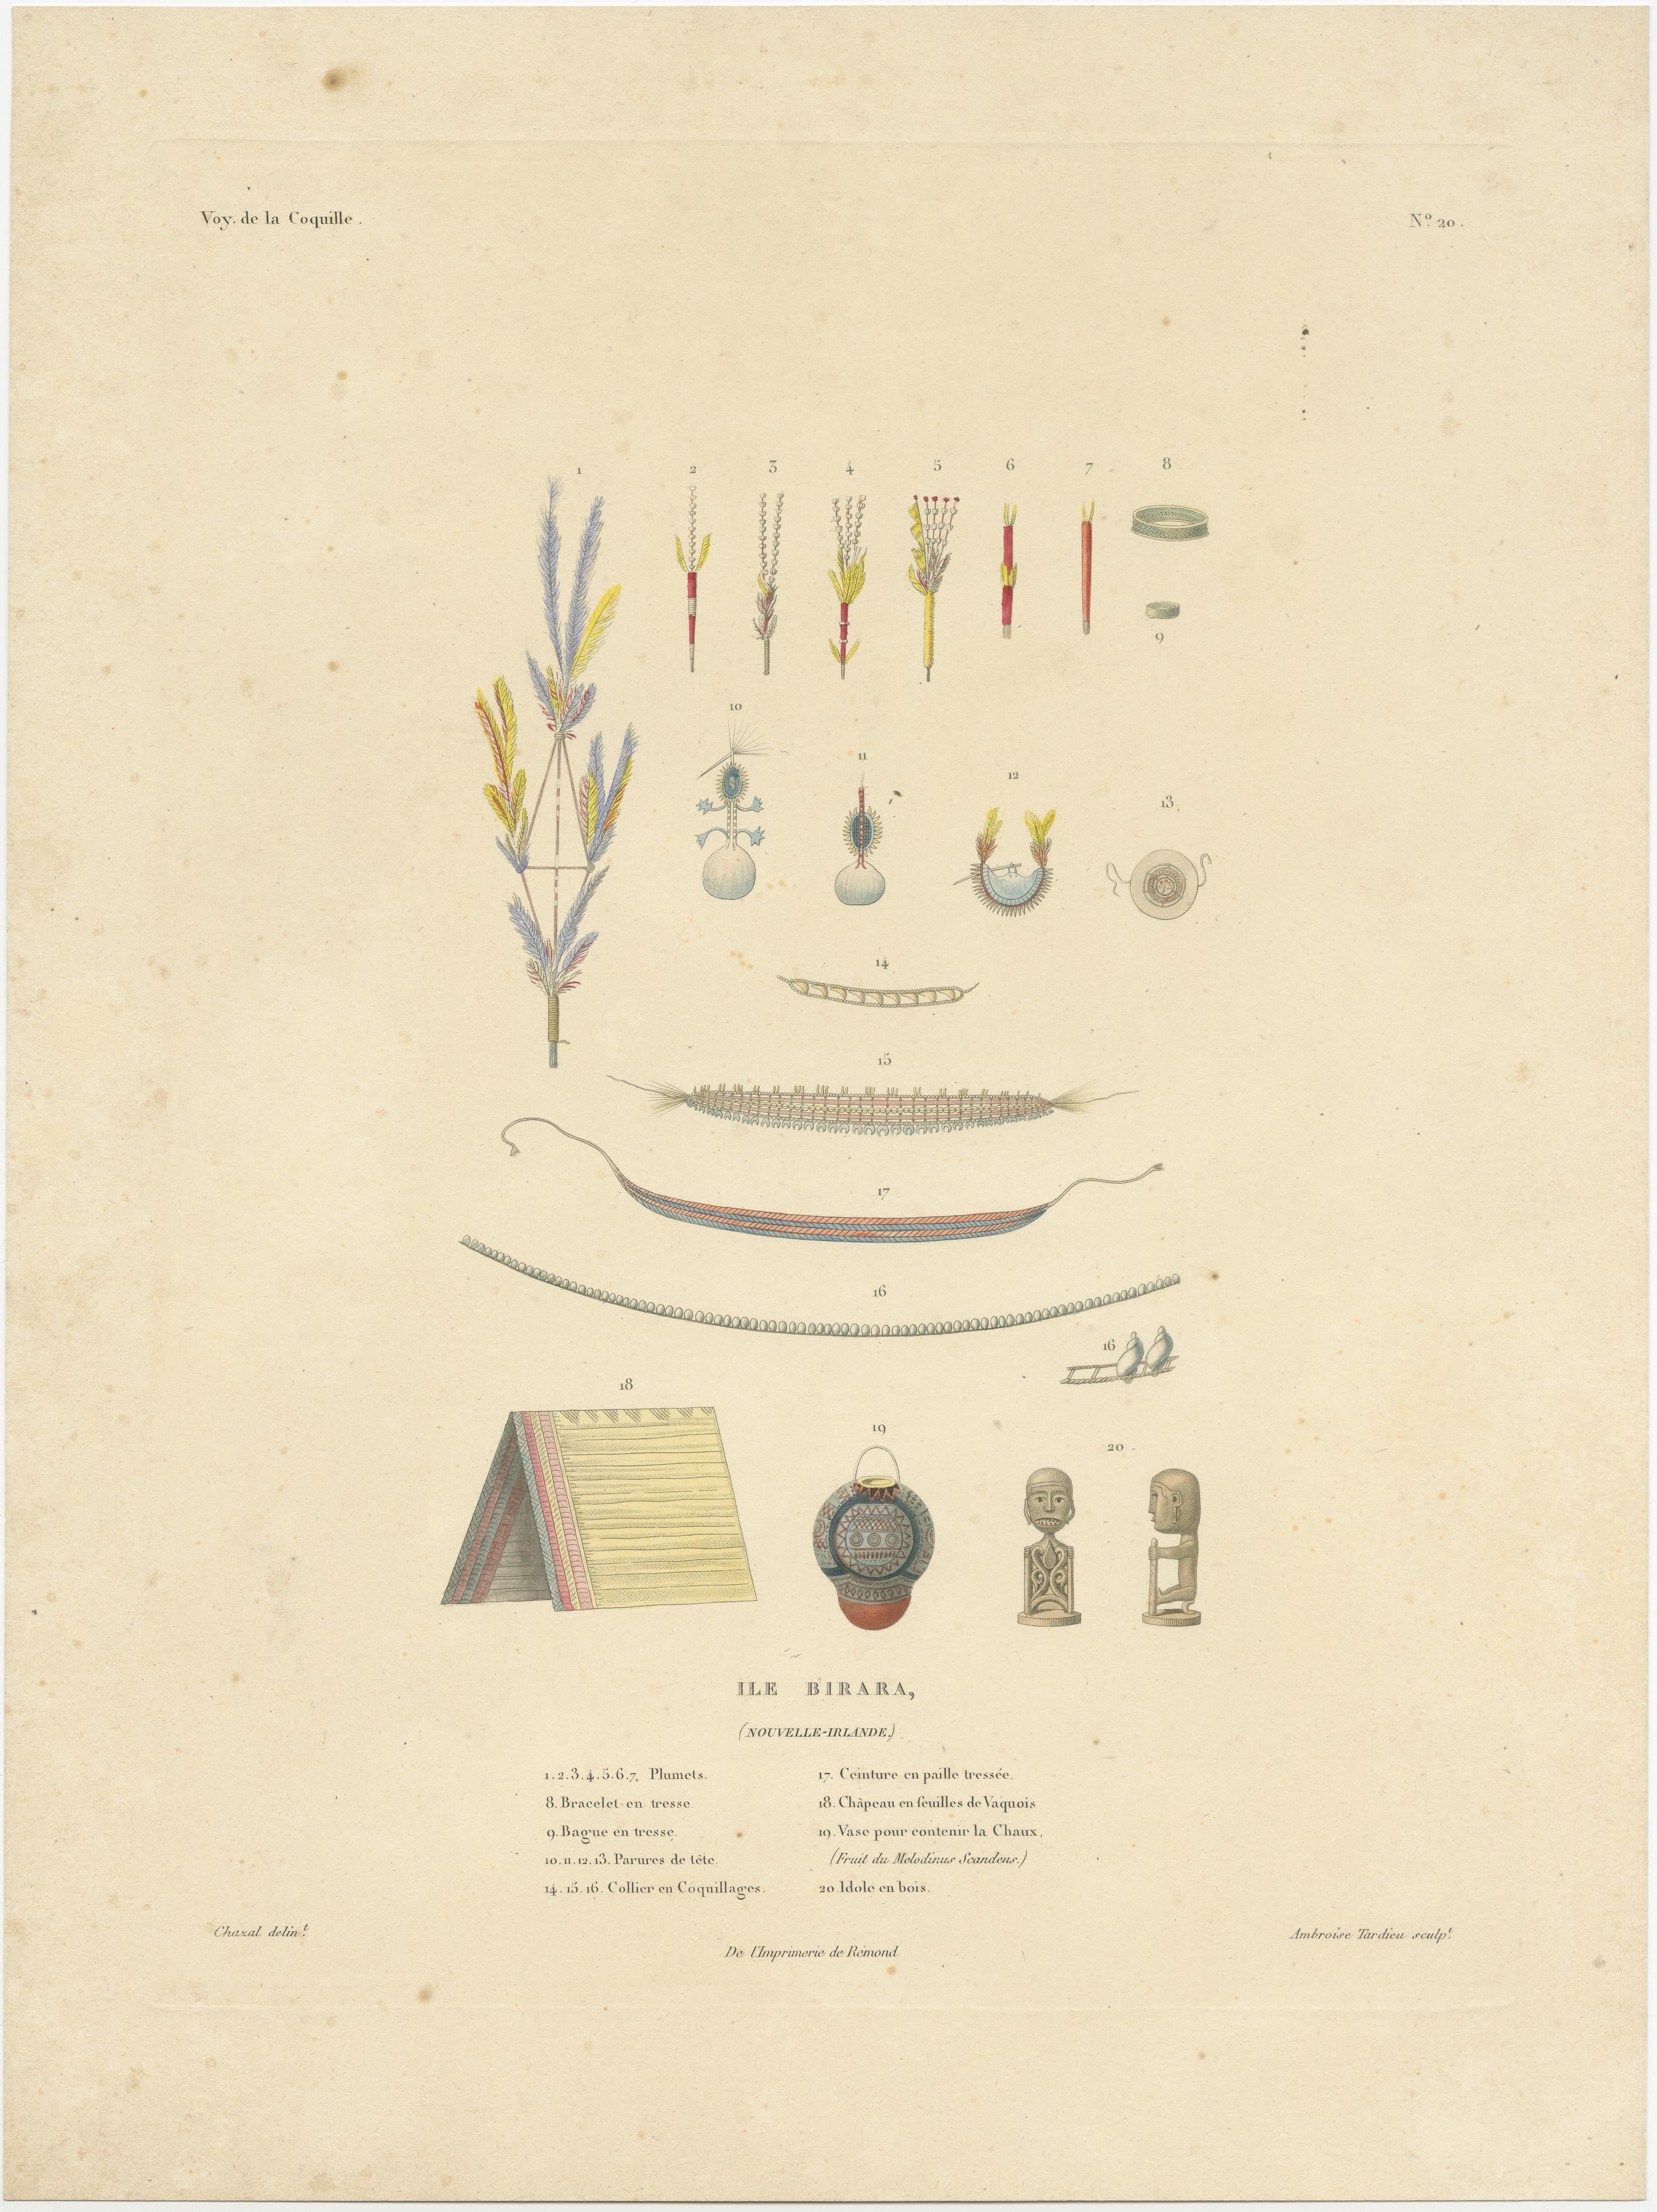 Antique print titled 'Ile Birara, Nouvelle-Irlande'. Jewellery, belts and other items from Birara Islands, New Ireland. Illustrated are a feather ornament, a ring, a bracelet, headdresses, a shell necklace, a plaited straw belt, a Vaquois-leaf hat,